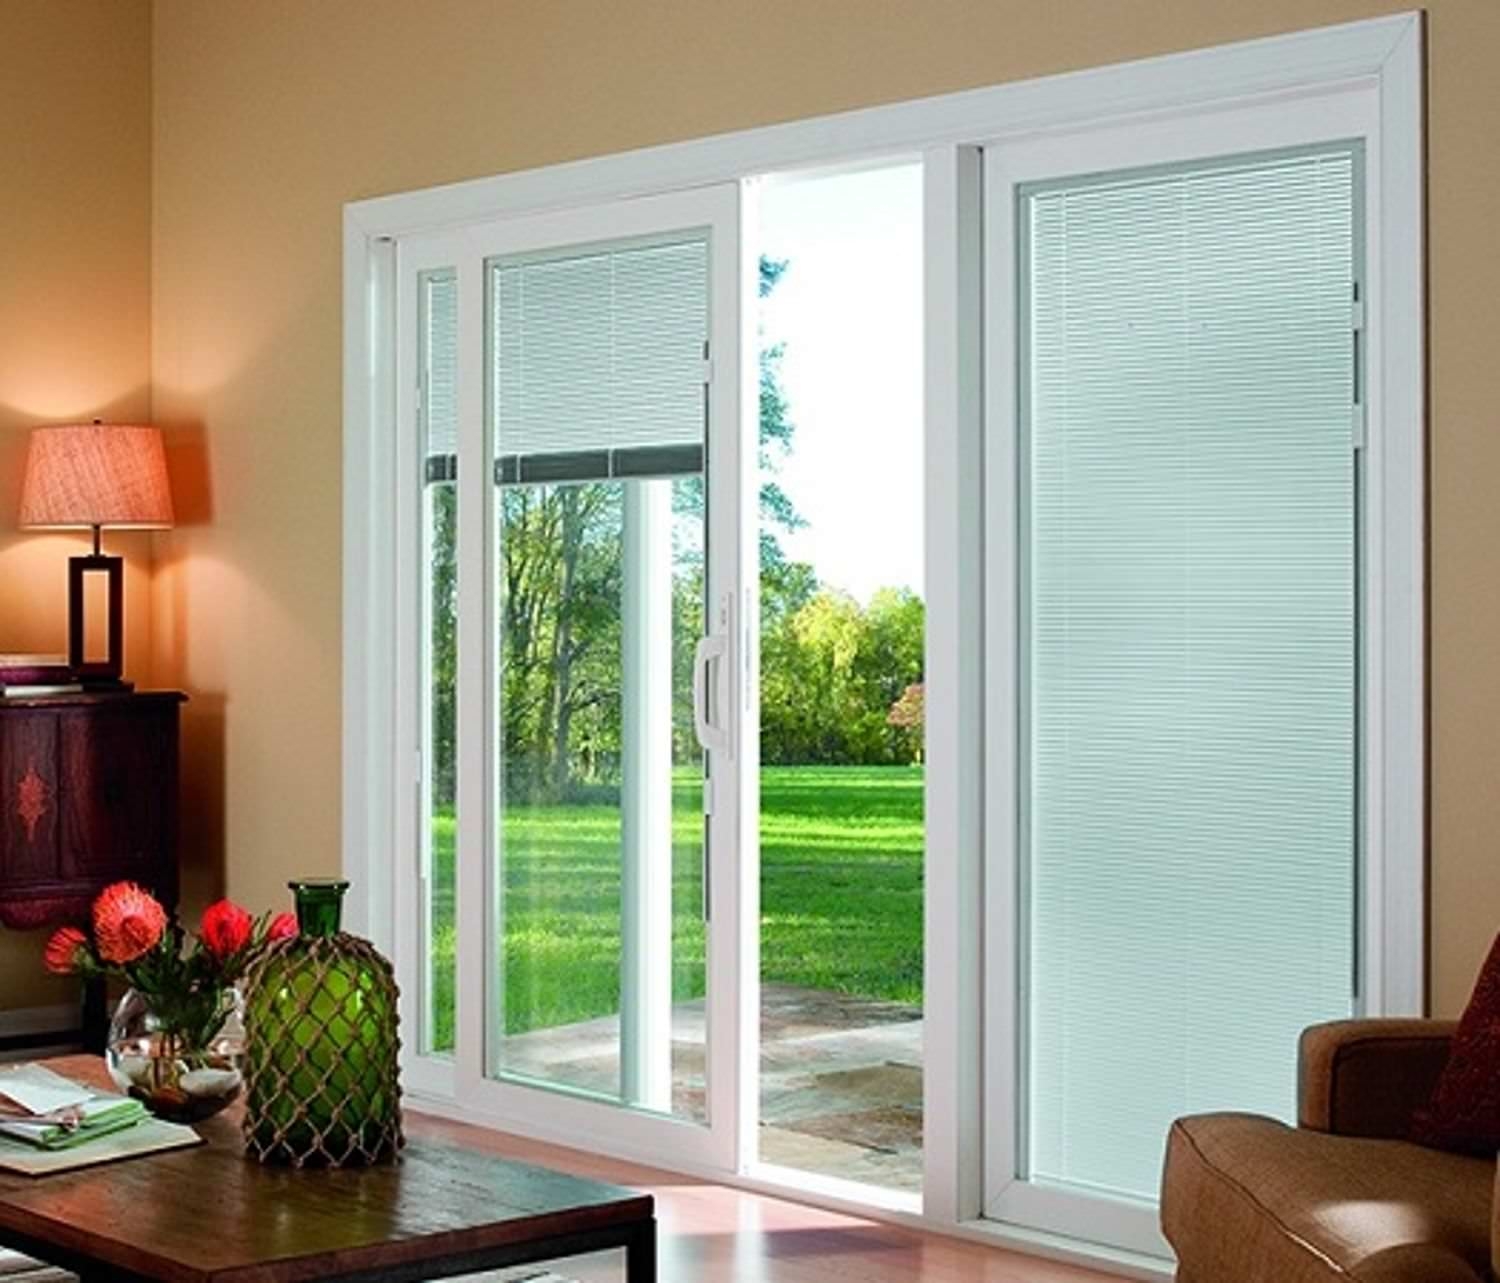 Sliding Glass Door Blinds You Ll Love, Can You Have Perfect Fit Blinds On Sliding Patio Doors